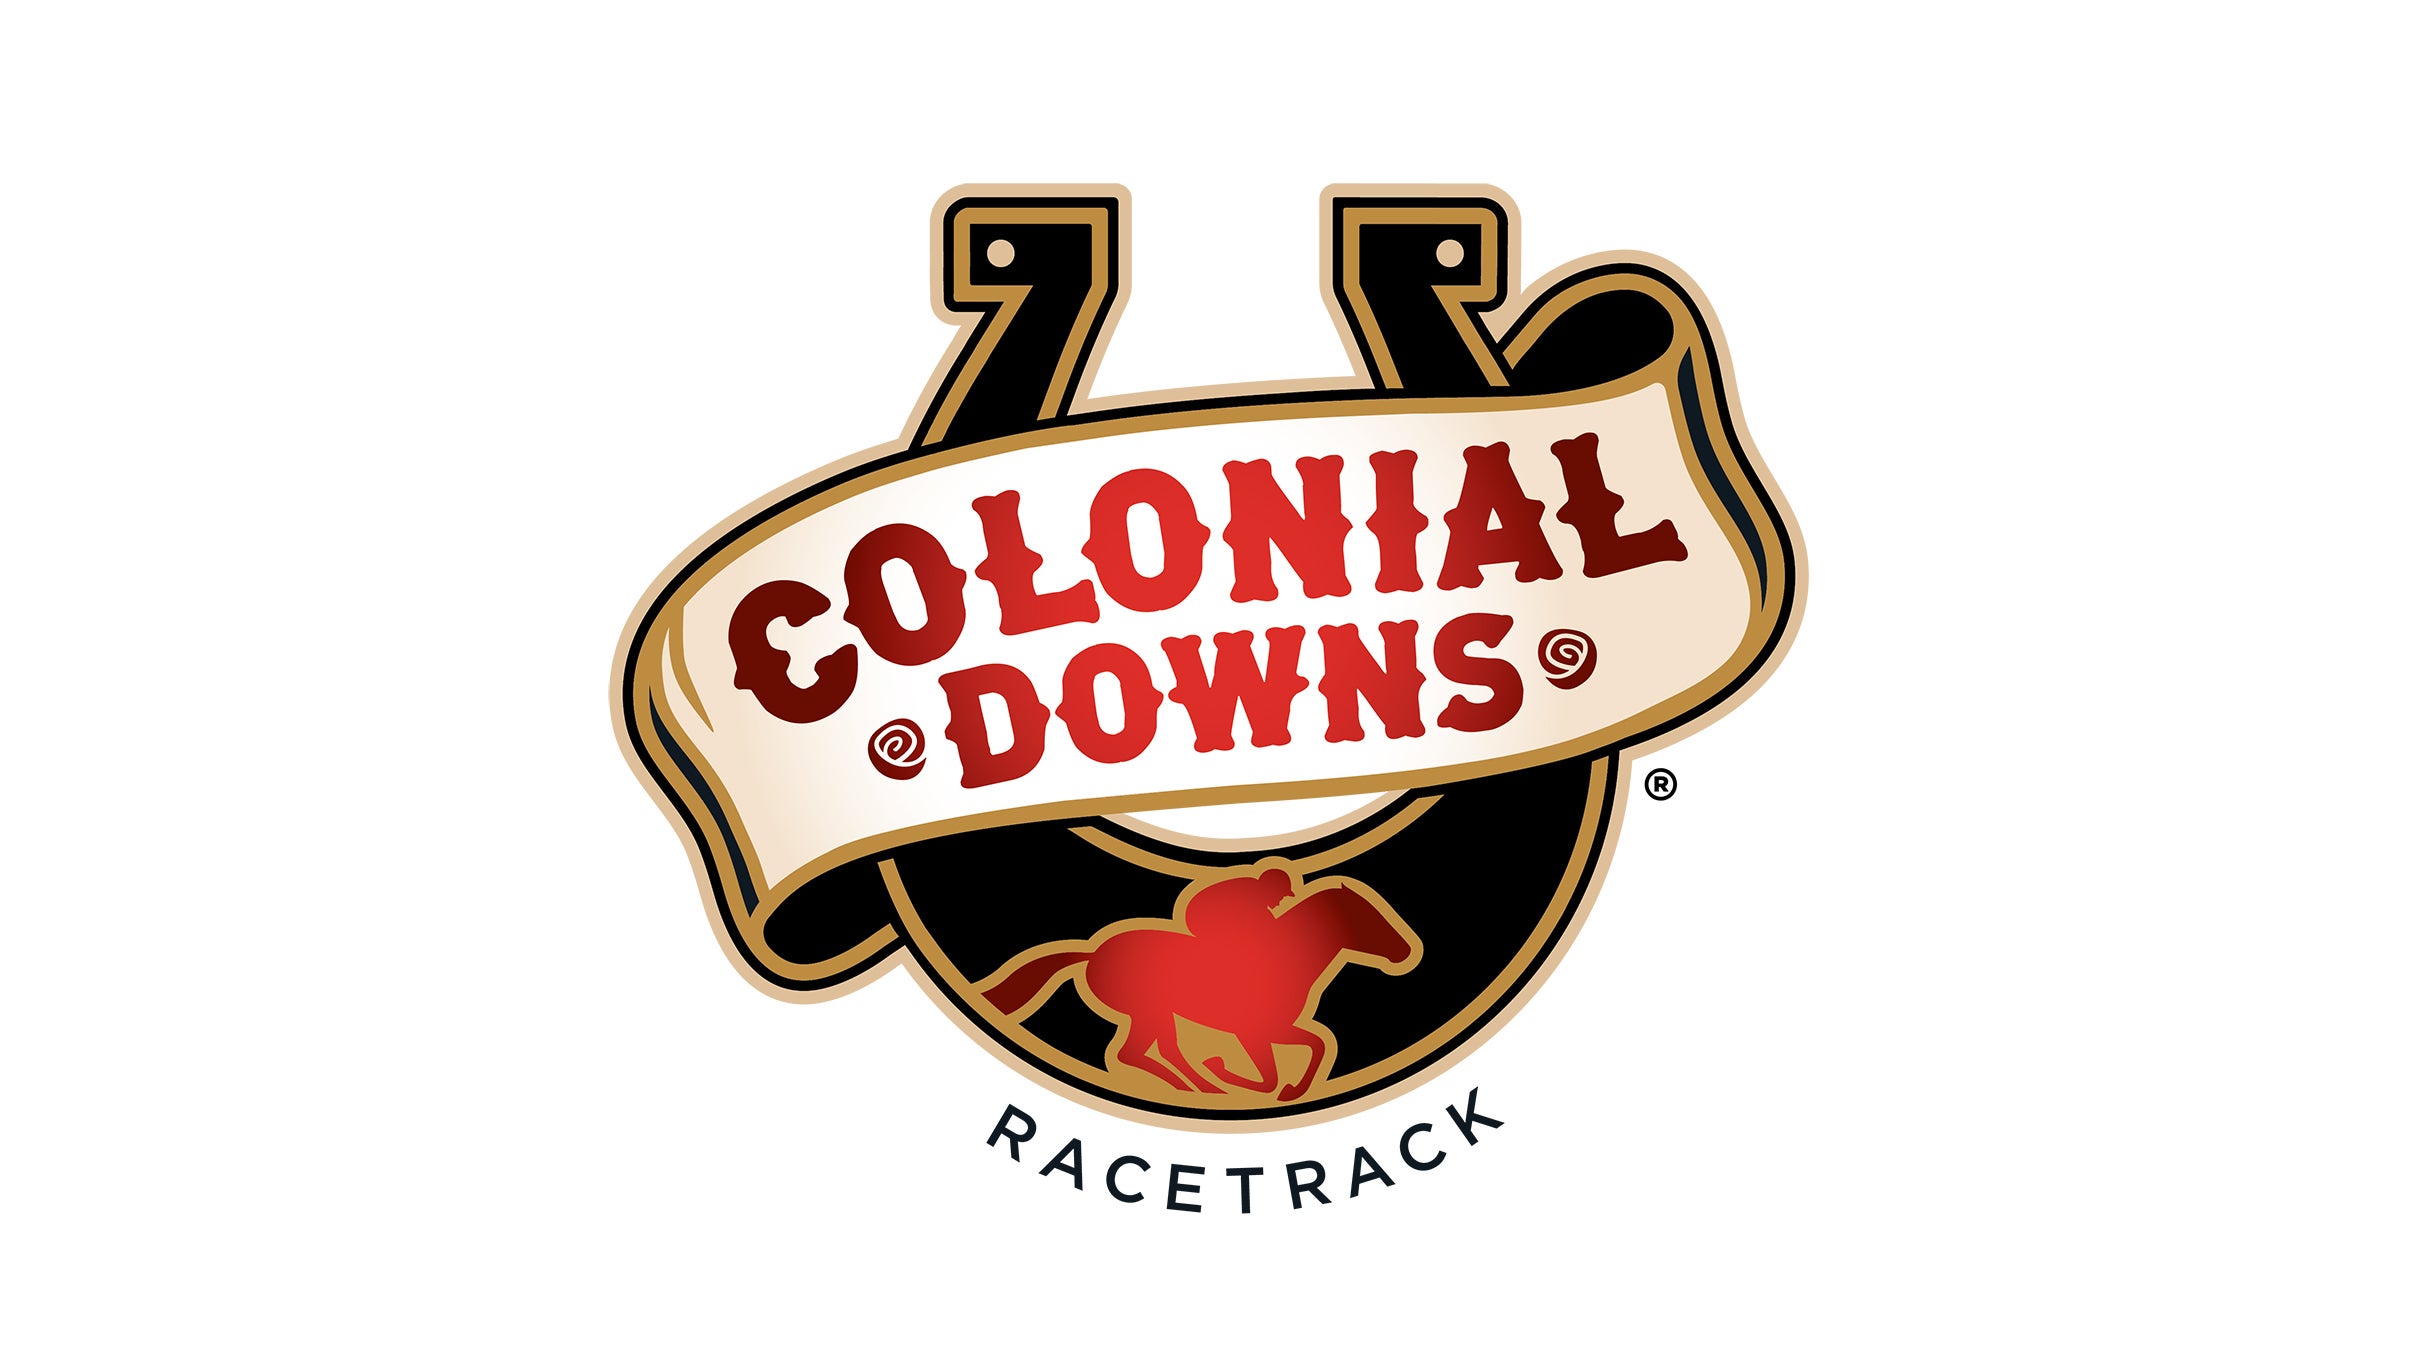 Colonial Downs Live Racing - Calendar Giveaway (First 1,000)